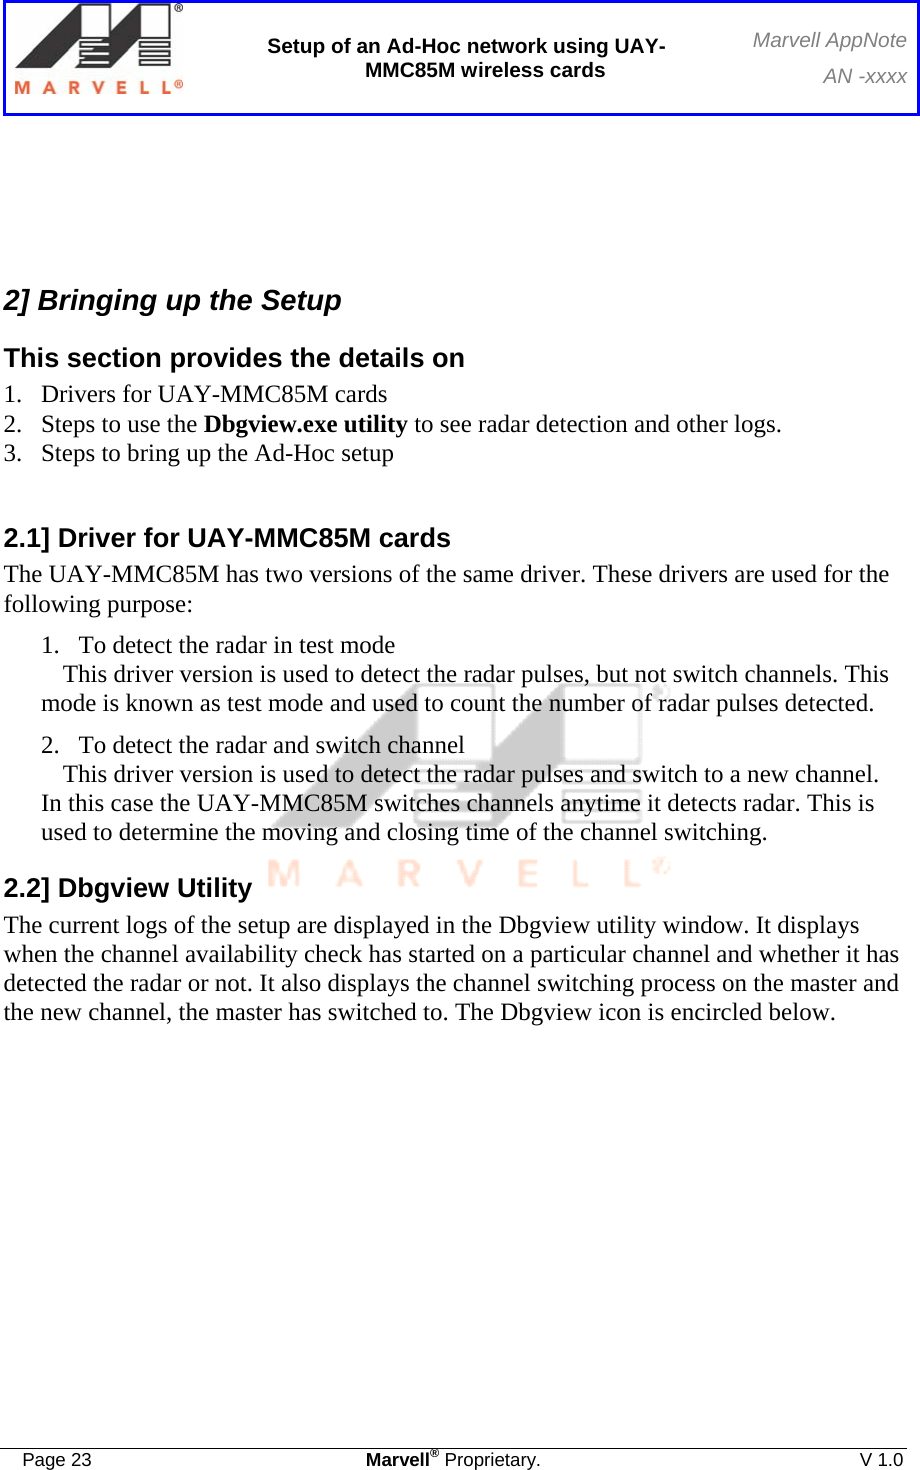  Setup of an Ad-Hoc network using UAY-MMC85M wireless cards Marvell AppNoteAN -xxxx  Page 23  Marvell® Proprietary.  V 1.0     2] Bringing up the Setup This section provides the details on  1.  Drivers for UAY-MMC85M cards  2.  Steps to use the Dbgview.exe utility to see radar detection and other logs.  3.  Steps to bring up the Ad-Hoc setup   2.1] Driver for UAY-MMC85M cards The UAY-MMC85M has two versions of the same driver. These drivers are used for the following purpose: 1. To detect the radar in test mode This driver version is used to detect the radar pulses, but not switch channels. This mode is known as test mode and used to count the number of radar pulses detected. 2. To detect the radar and switch channel This driver version is used to detect the radar pulses and switch to a new channel. In this case the UAY-MMC85M switches channels anytime it detects radar. This is used to determine the moving and closing time of the channel switching. 2.2] Dbgview Utility The current logs of the setup are displayed in the Dbgview utility window. It displays when the channel availability check has started on a particular channel and whether it has detected the radar or not. It also displays the channel switching process on the master and the new channel, the master has switched to. The Dbgview icon is encircled below. 